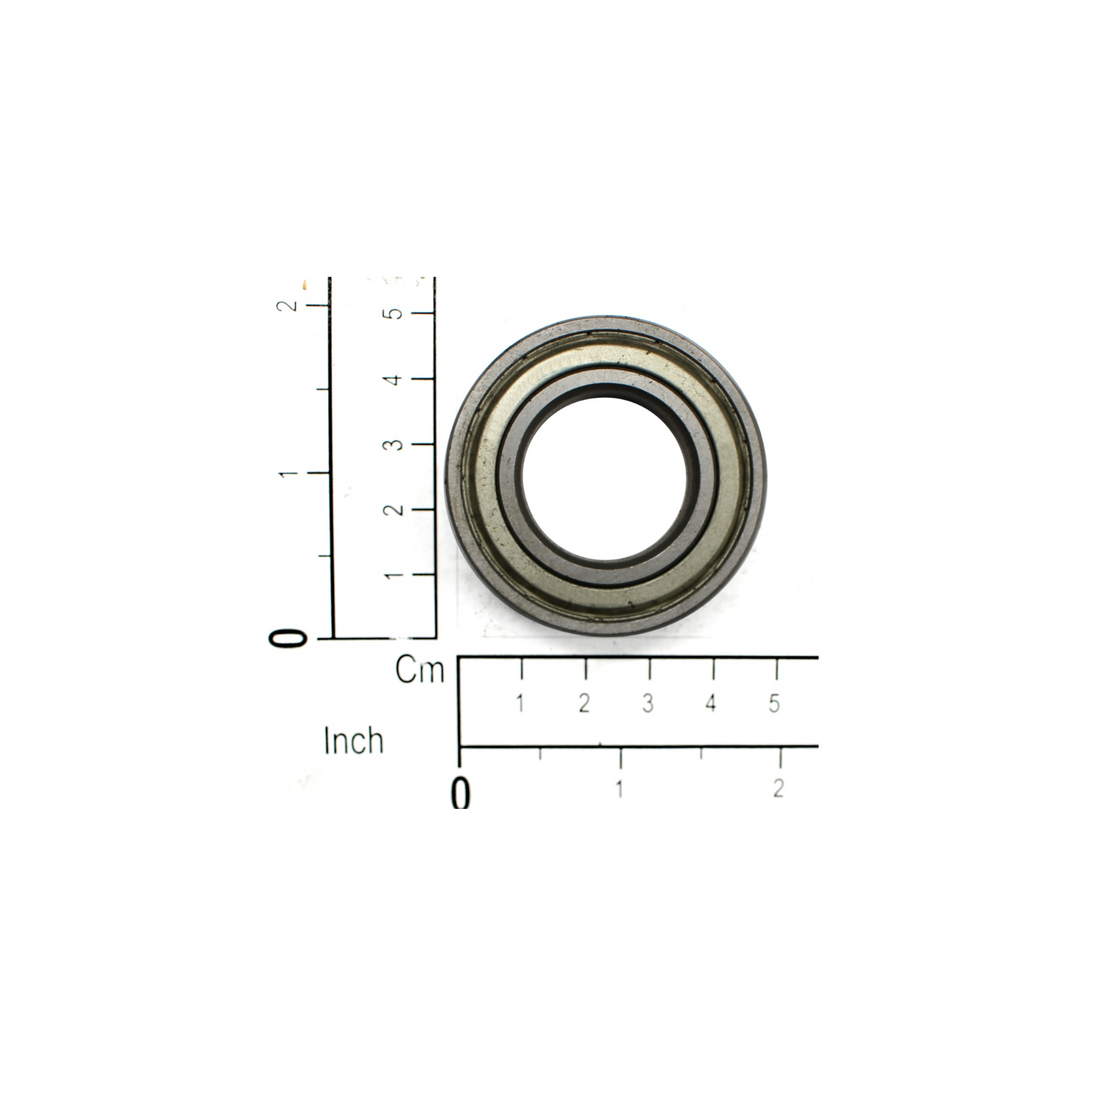 R&M Parts - Bearing, Part Number: 6300201050